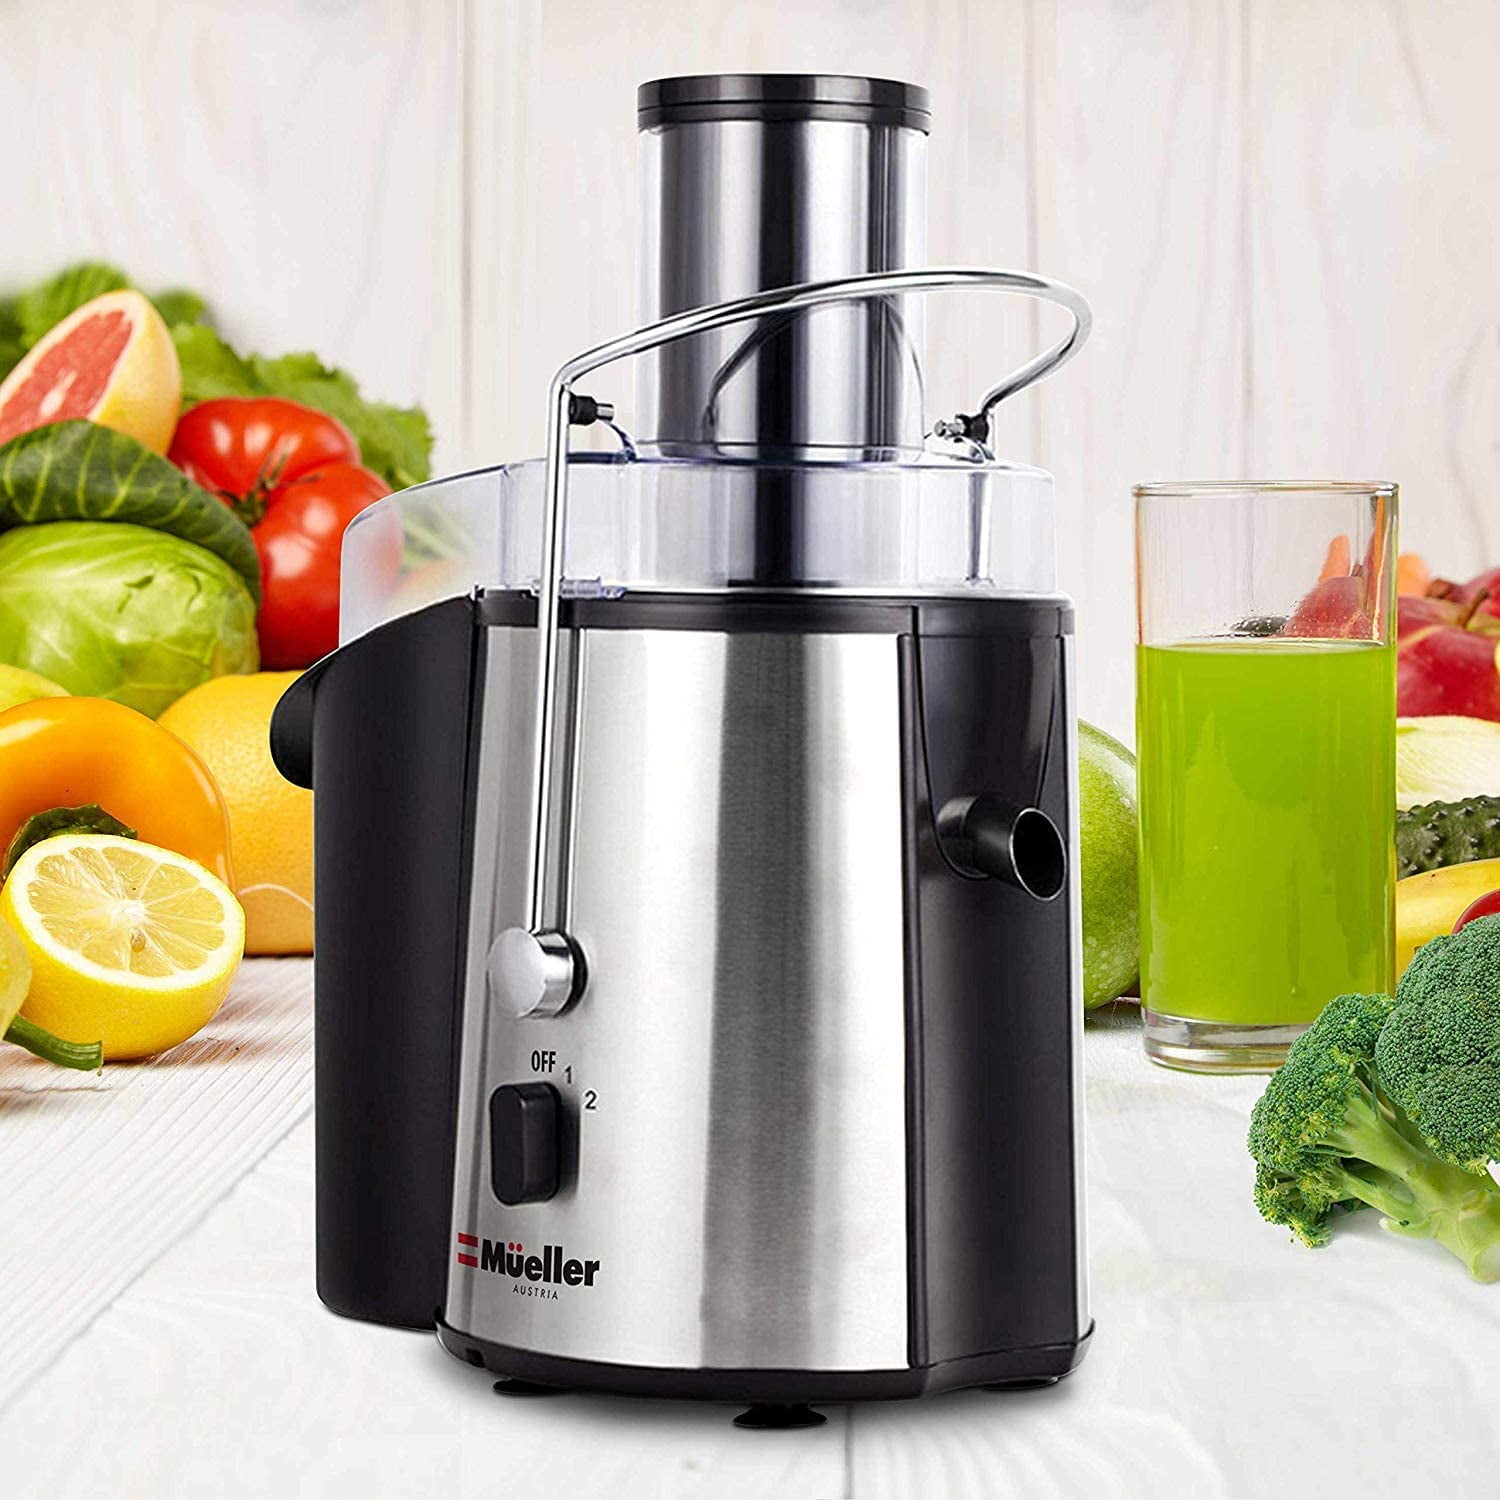 The Mueller SD80A Juicer is a powerful centrifugal juicing machine